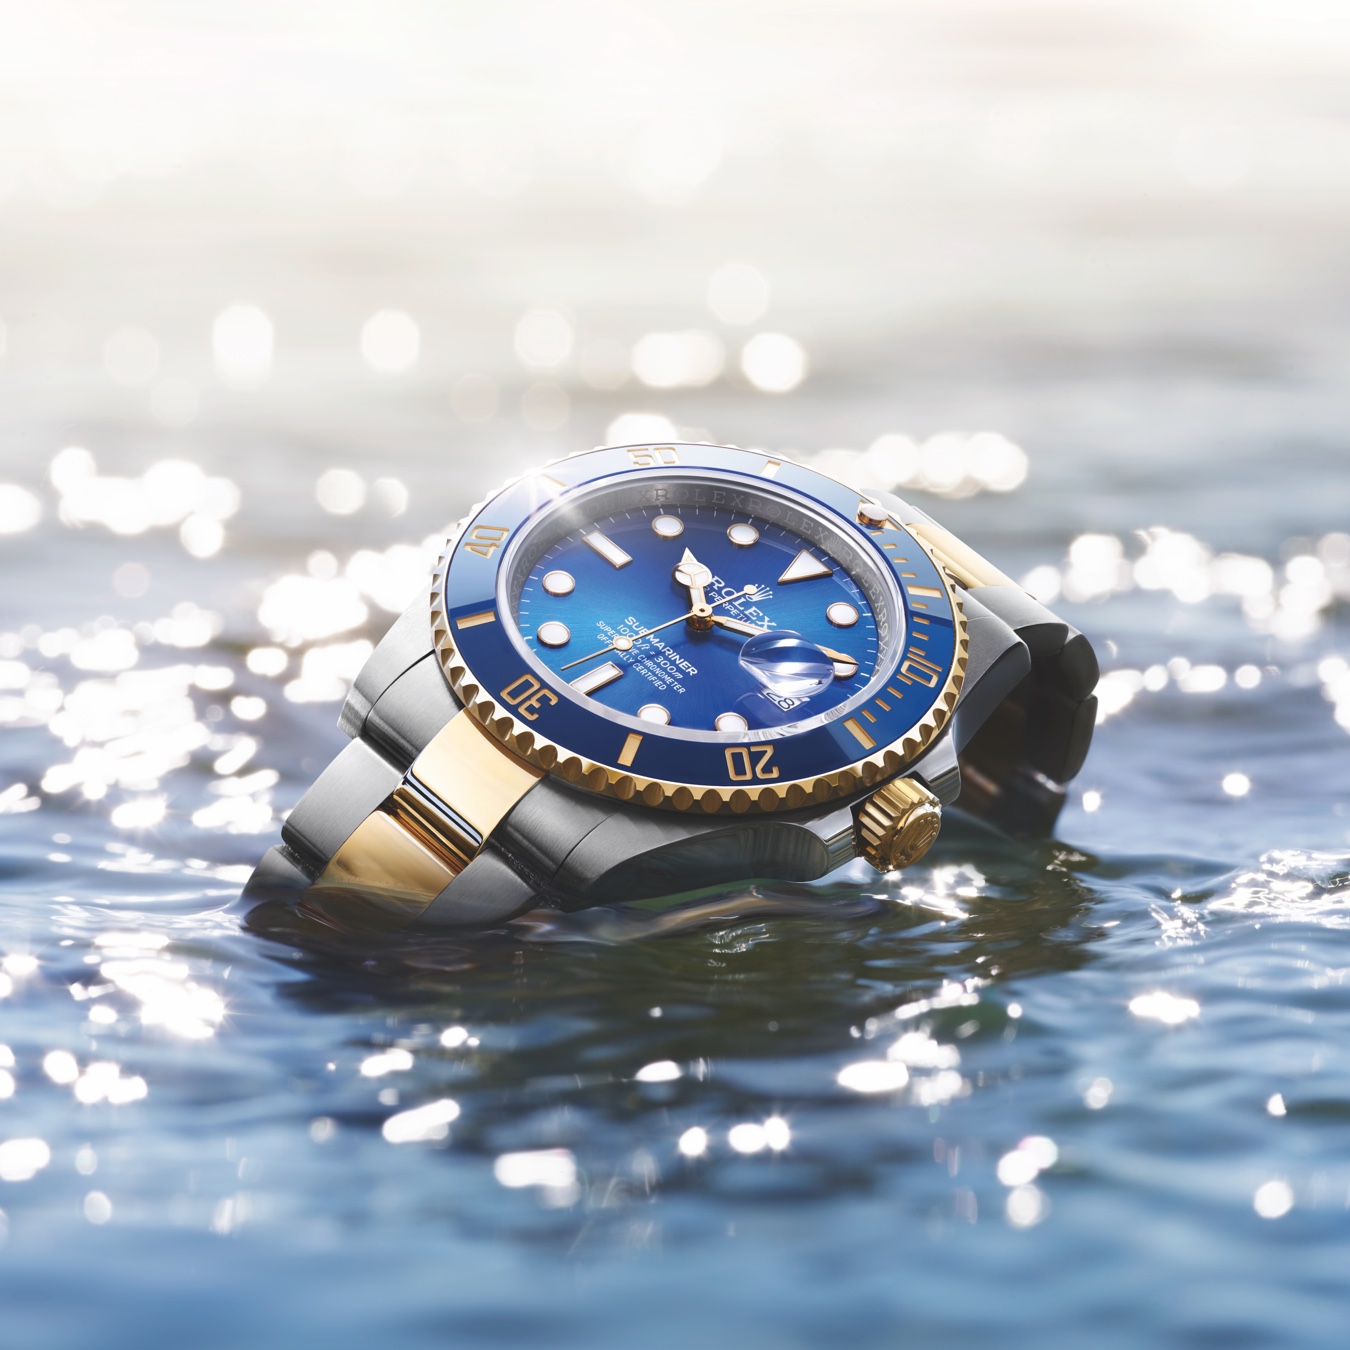 Two-tone Rolex watch with navy dial in water